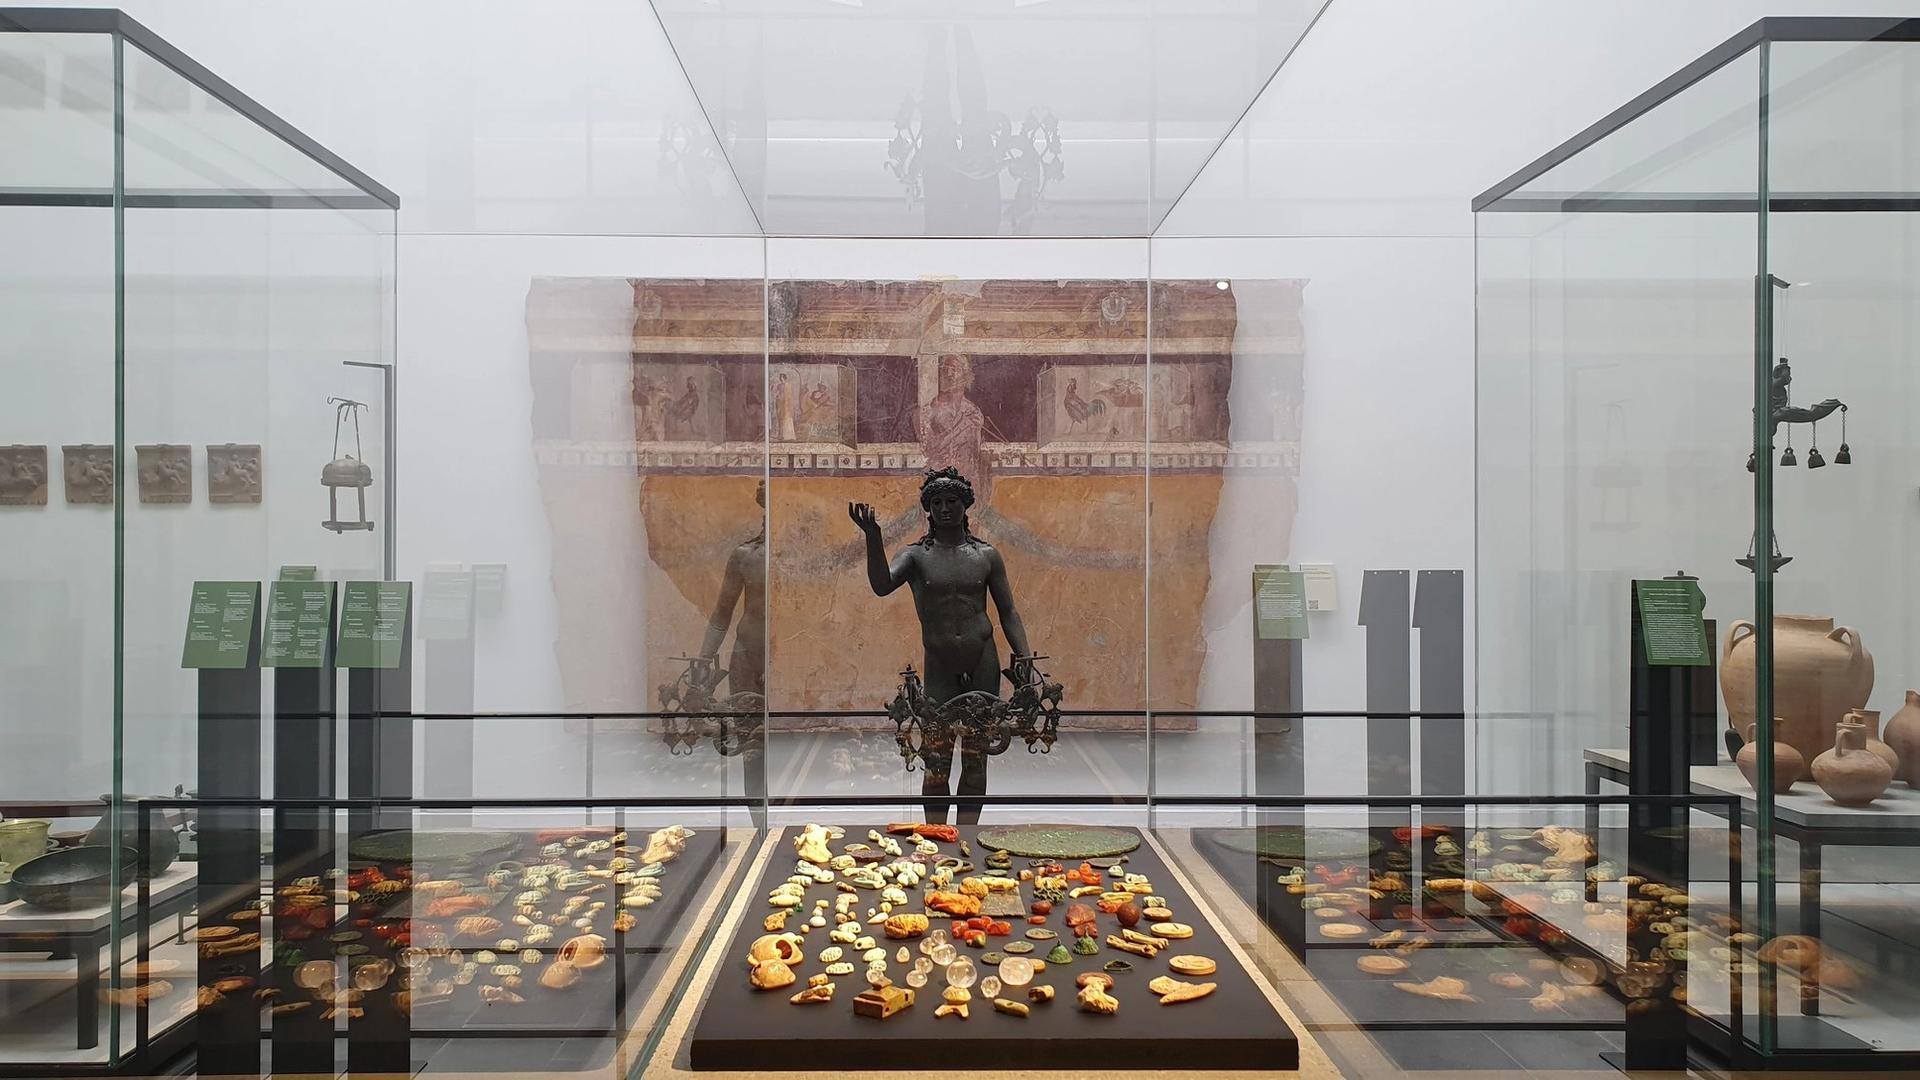 <p class="font_7"><a href="https://www.theartnewspaper.com/2021/01/26/from-roman-dining-to-the-victims-of-vesuvius-pompeii-hails-reopening-of-archaeological-museum"><u>Pompeii hails reopening of Archaeological Museum</u></a></p>